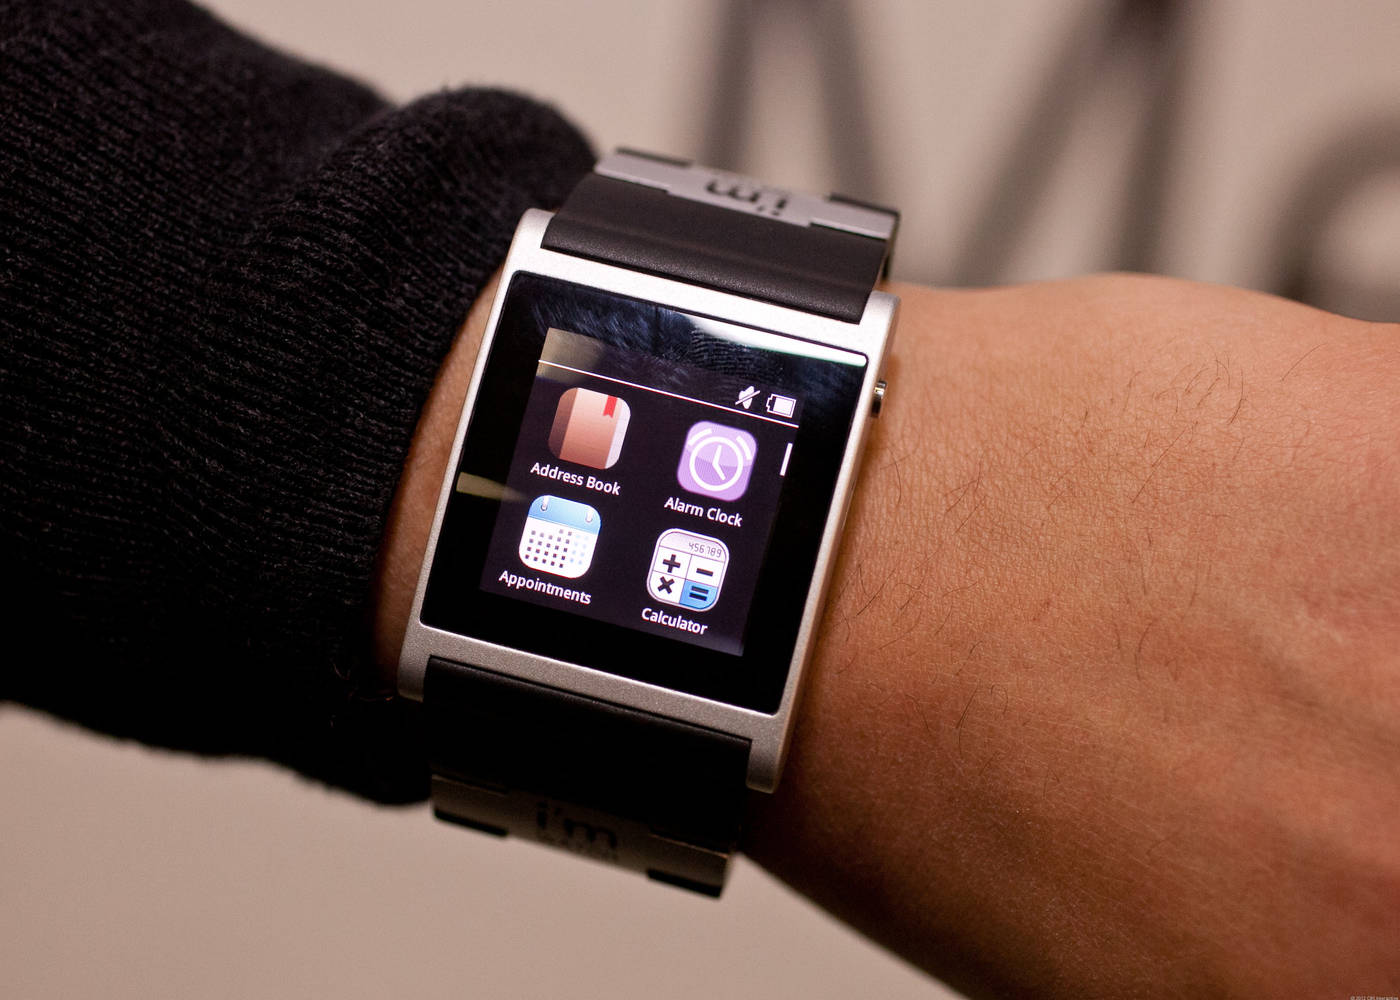 Samsung Galaxy Gear specs and images - 8